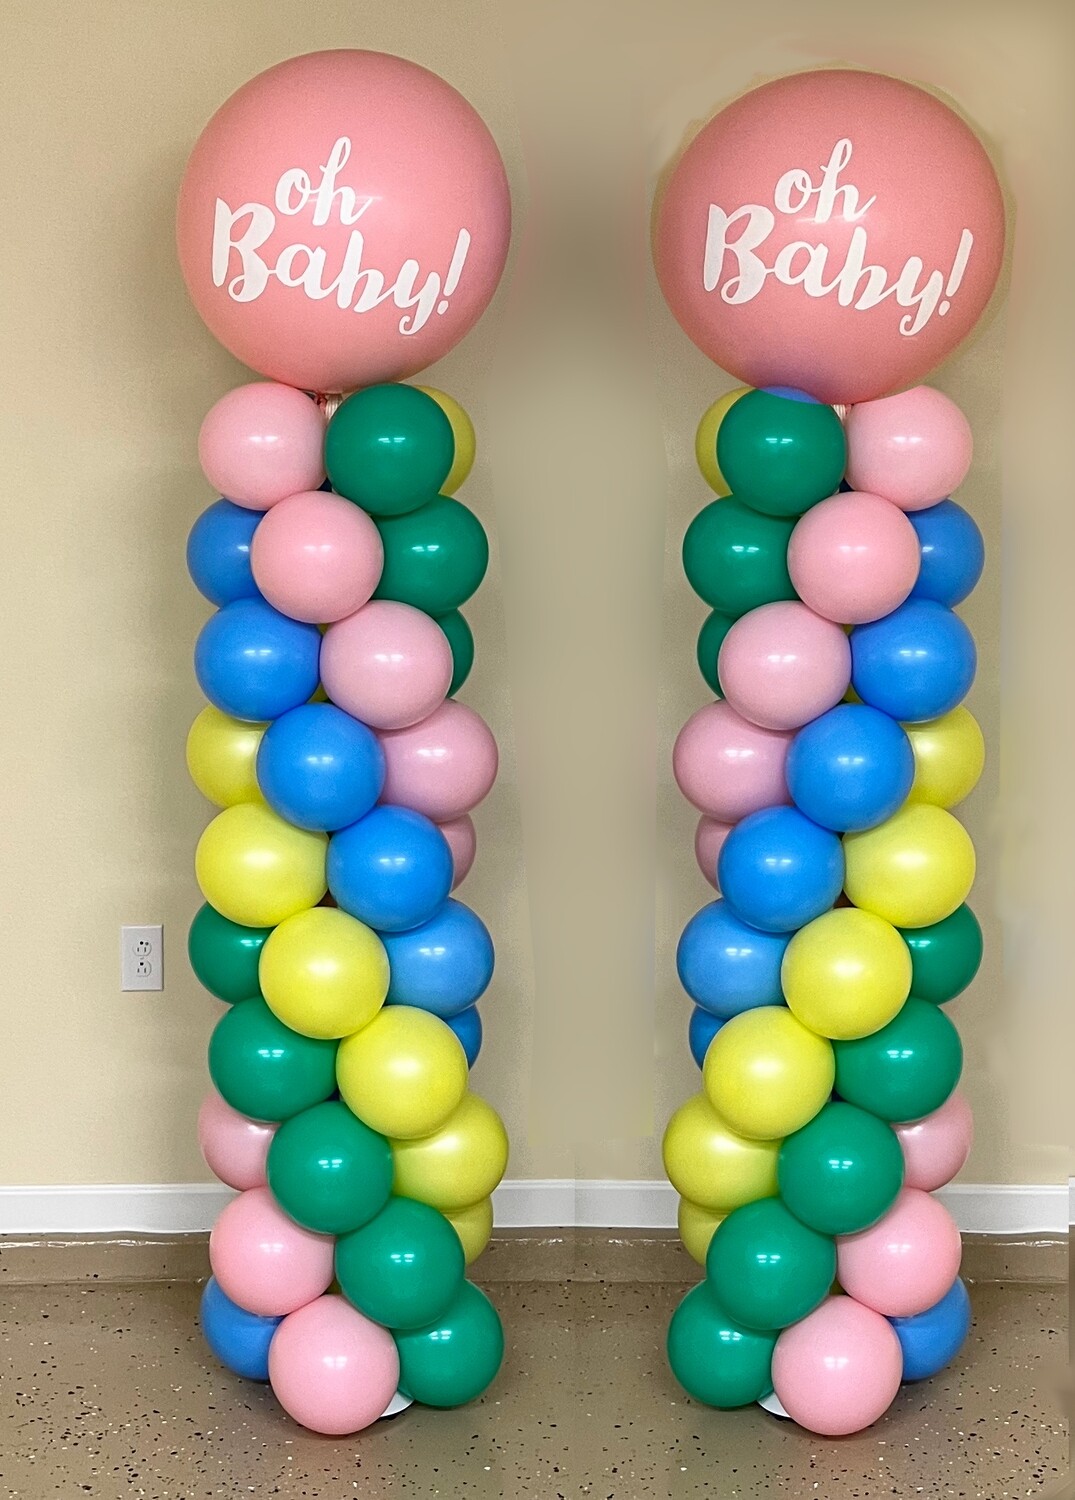 TWO Oh baby balloon columns with pink topper